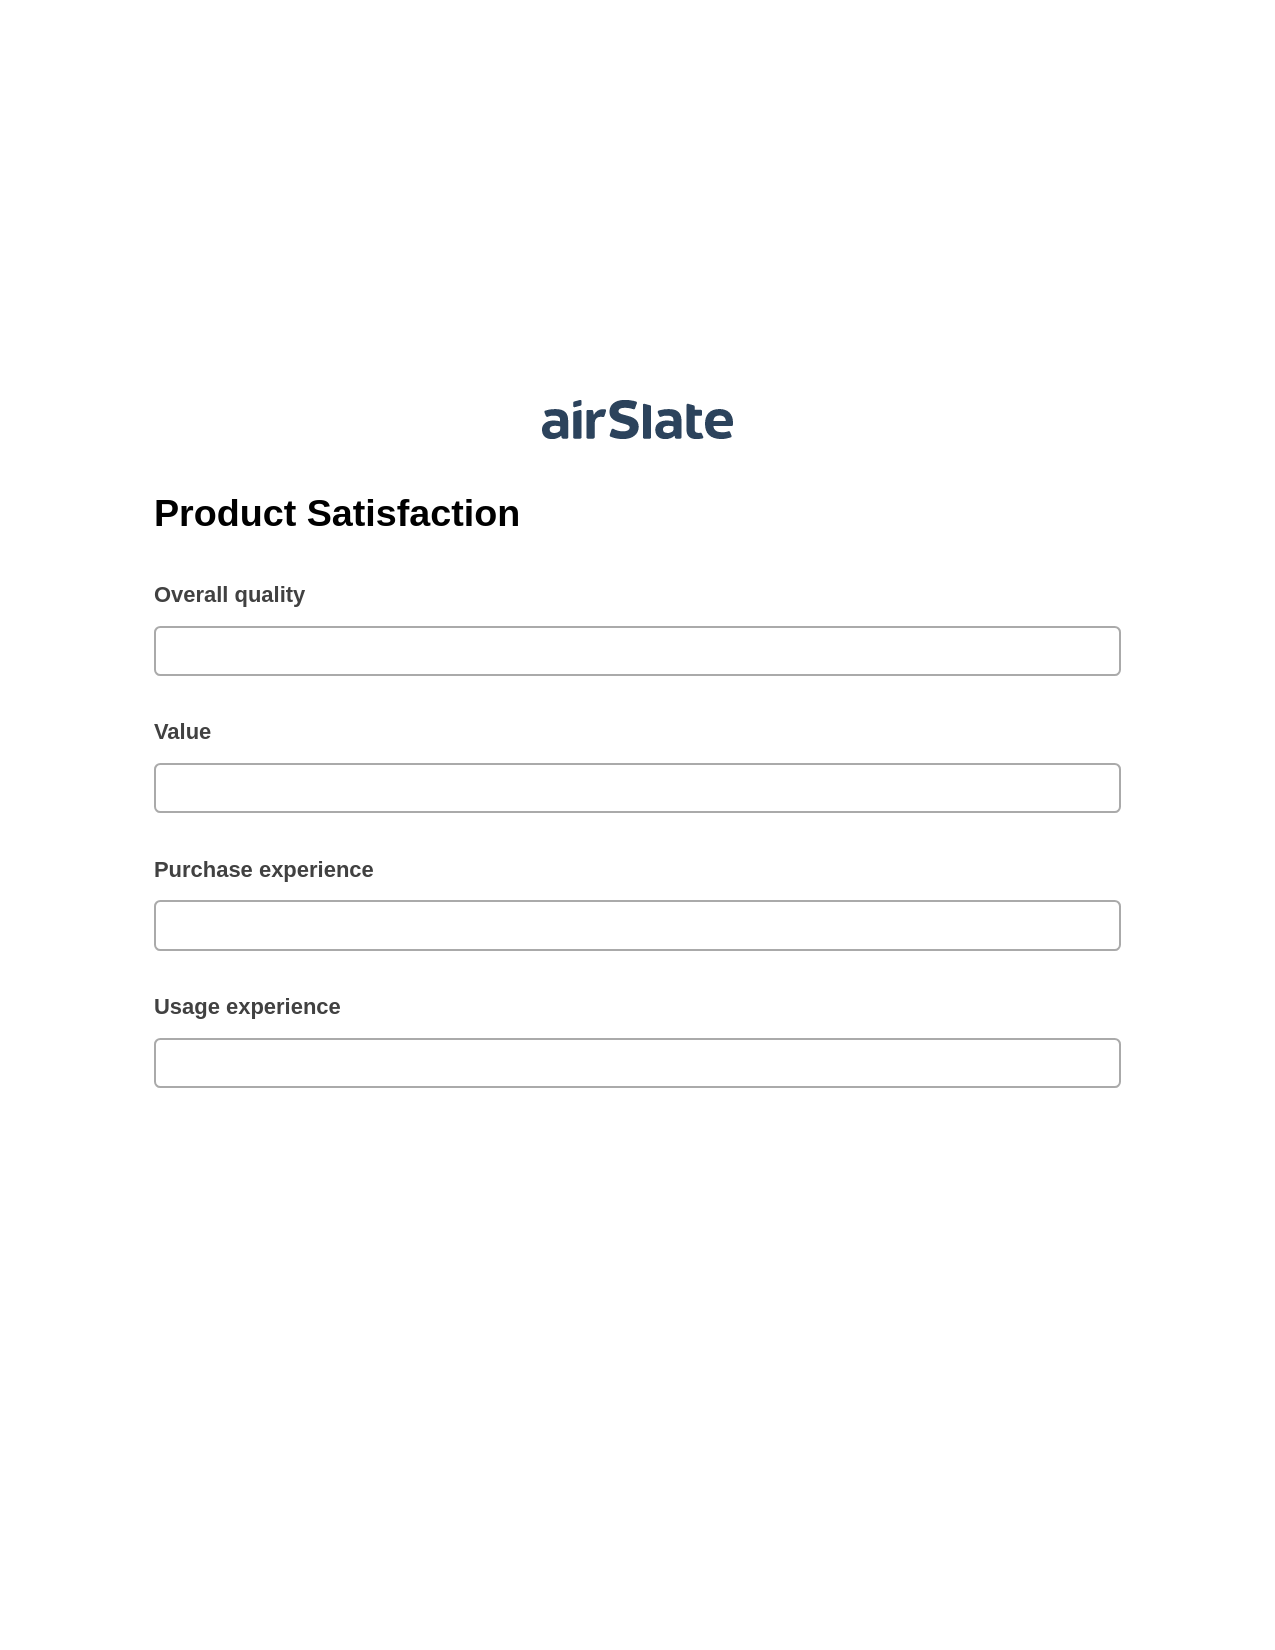 Product Satisfaction Pre-fill Slate from MS Dynamics 365 Records Bot, Create QuickBooks invoice Bot, Google Drive Bot